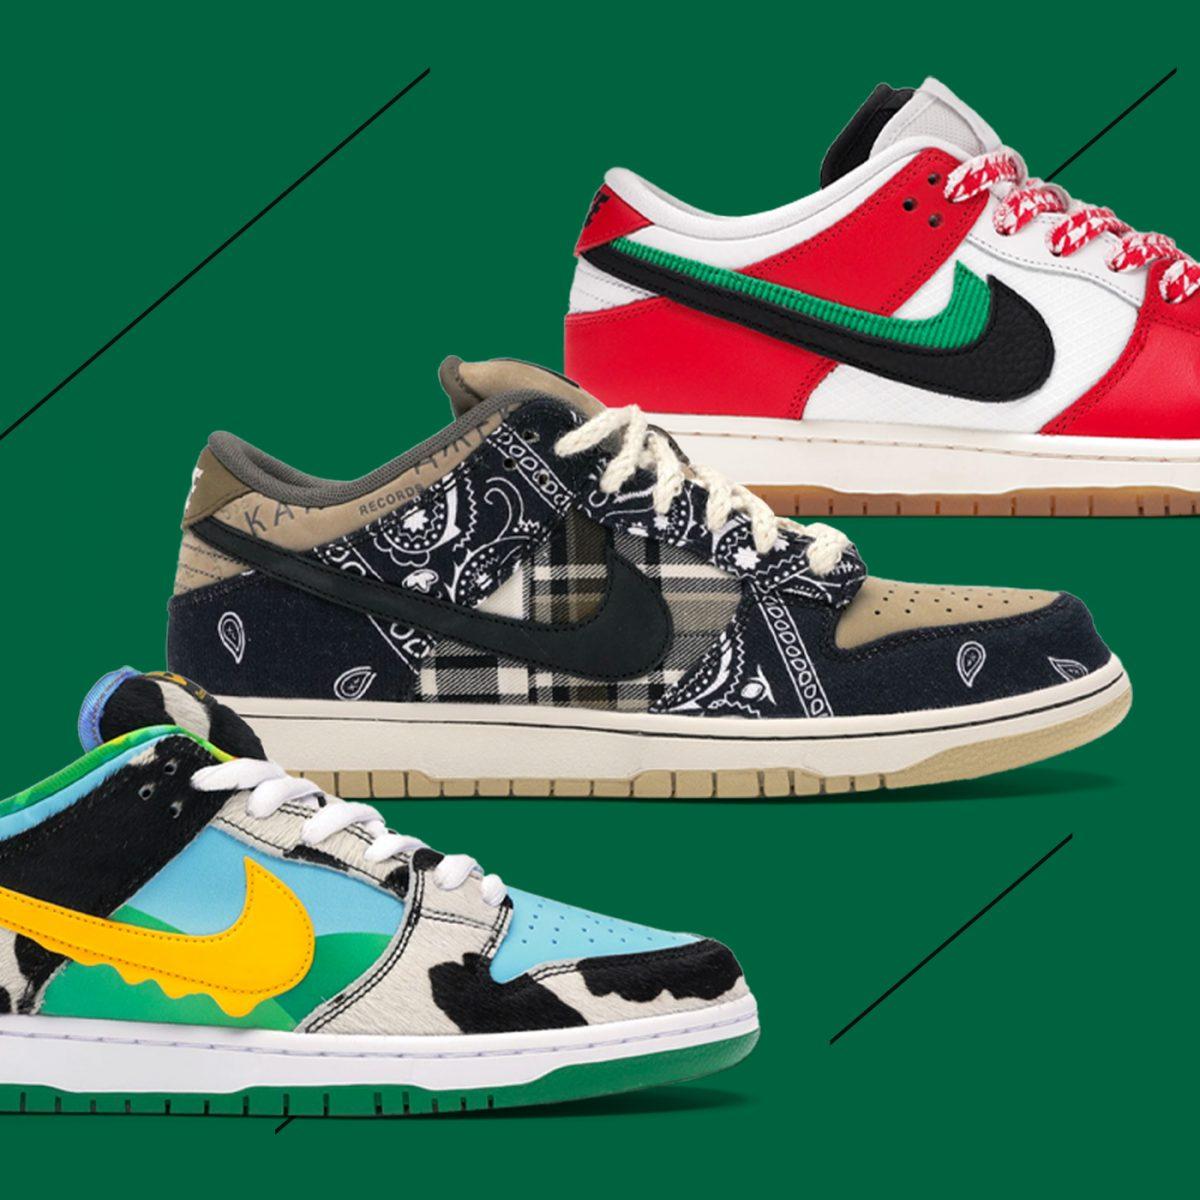 What's The Difference Between The Nike Dunk & Nike SB Dunk?